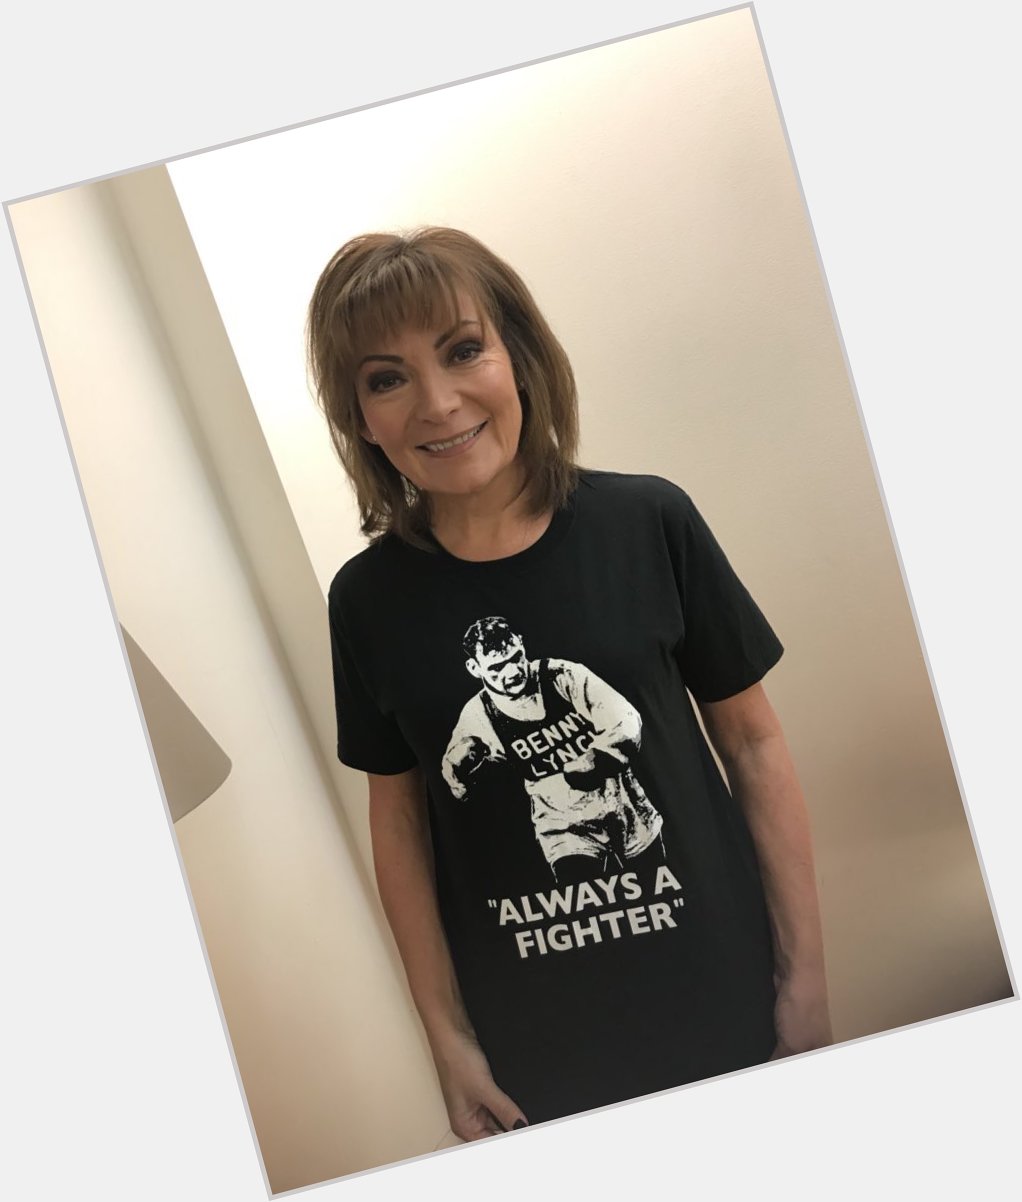 Happy Birthday to Lorraine Kelly from Team Benny Lynch, thanks for your support!   